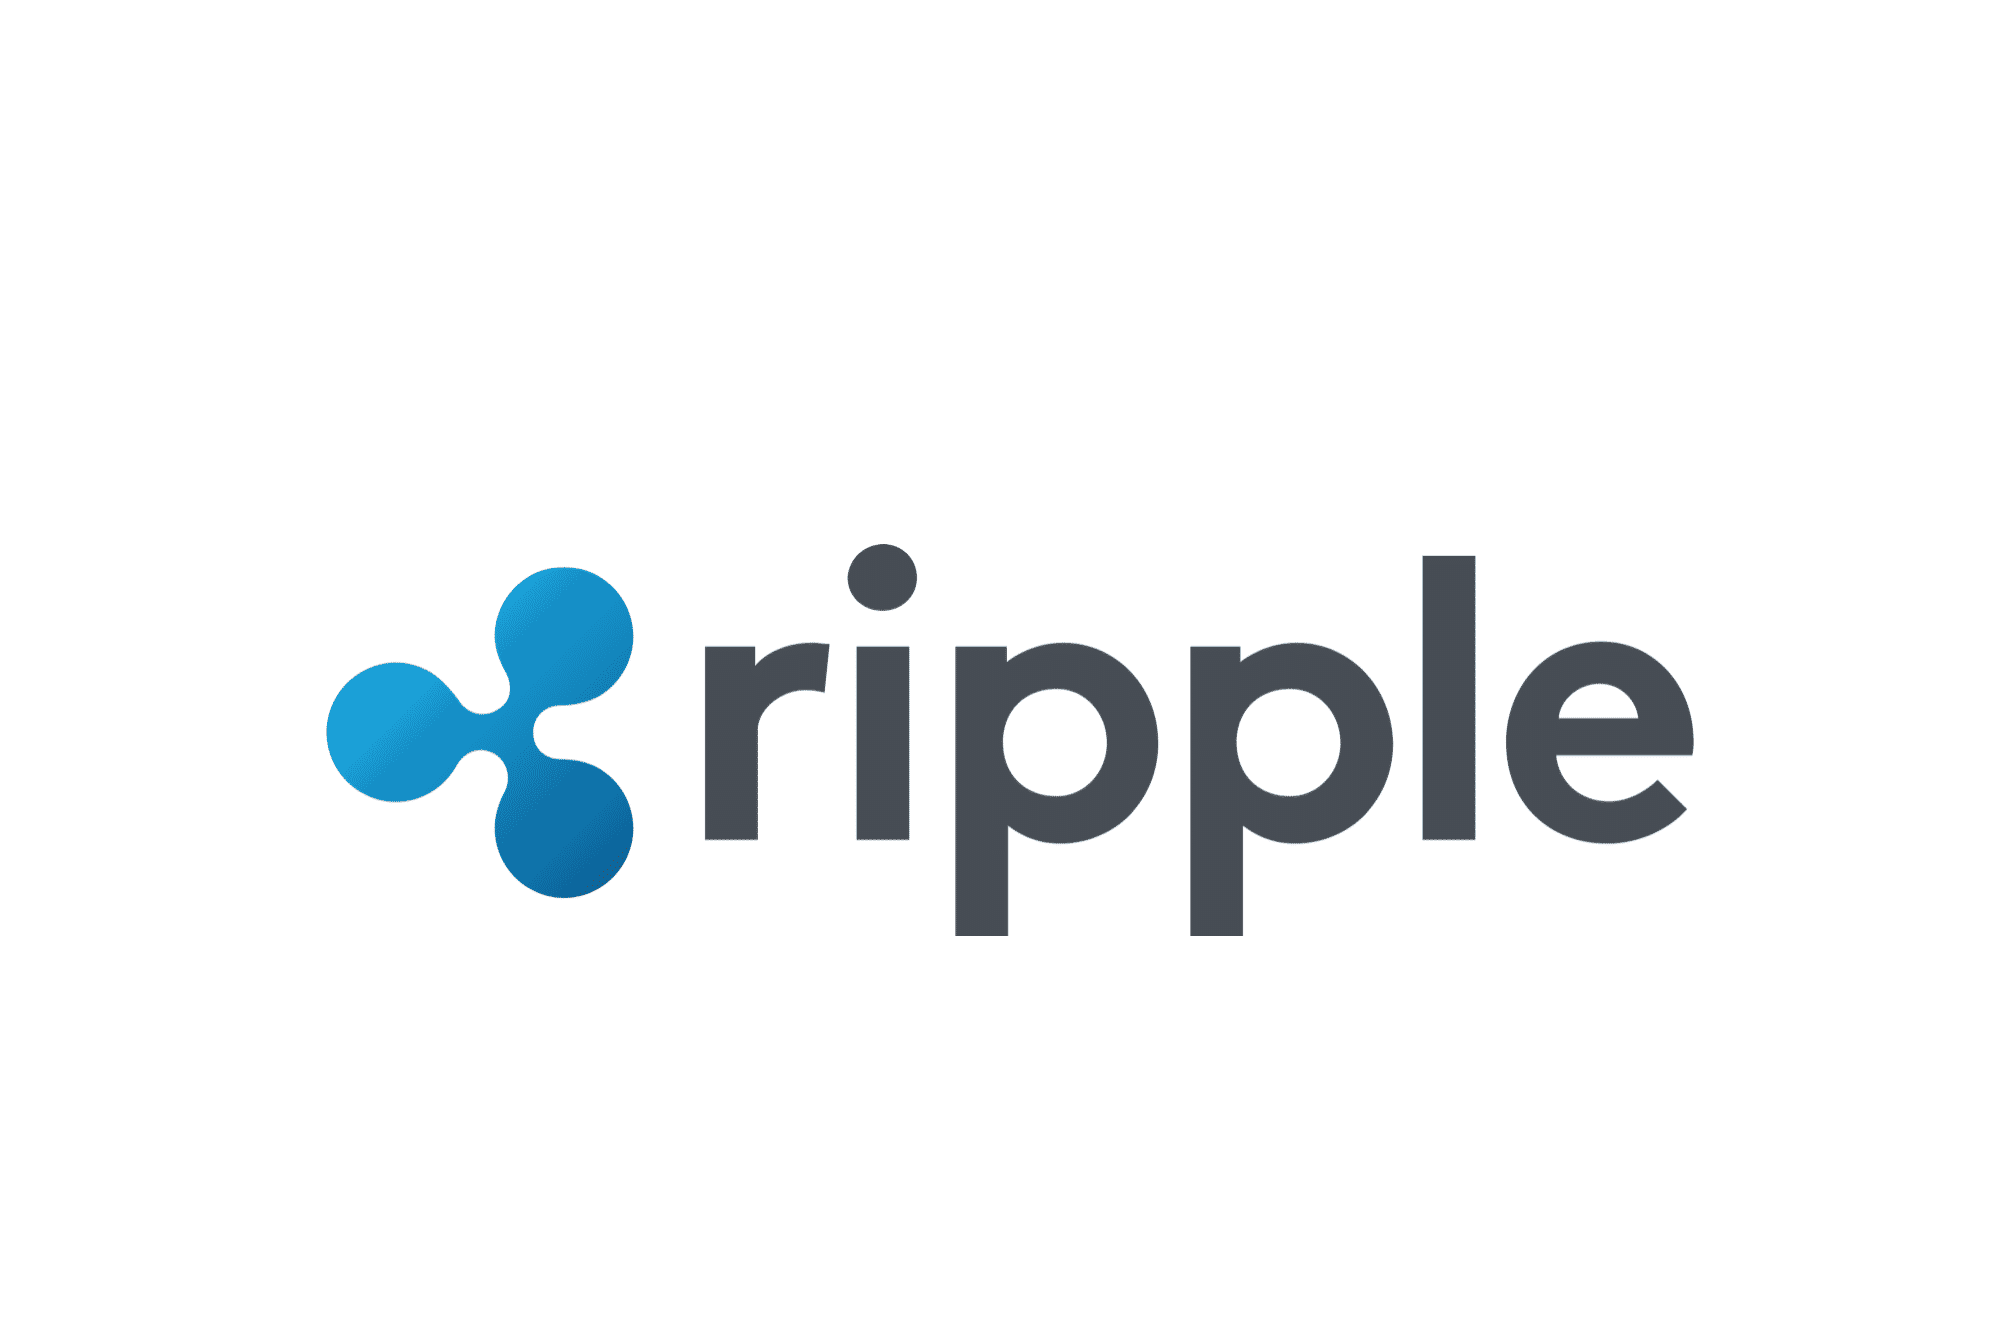 7 Ways to Buy Ripple (XRP) instantly in 2022 - A Beginner's Guide